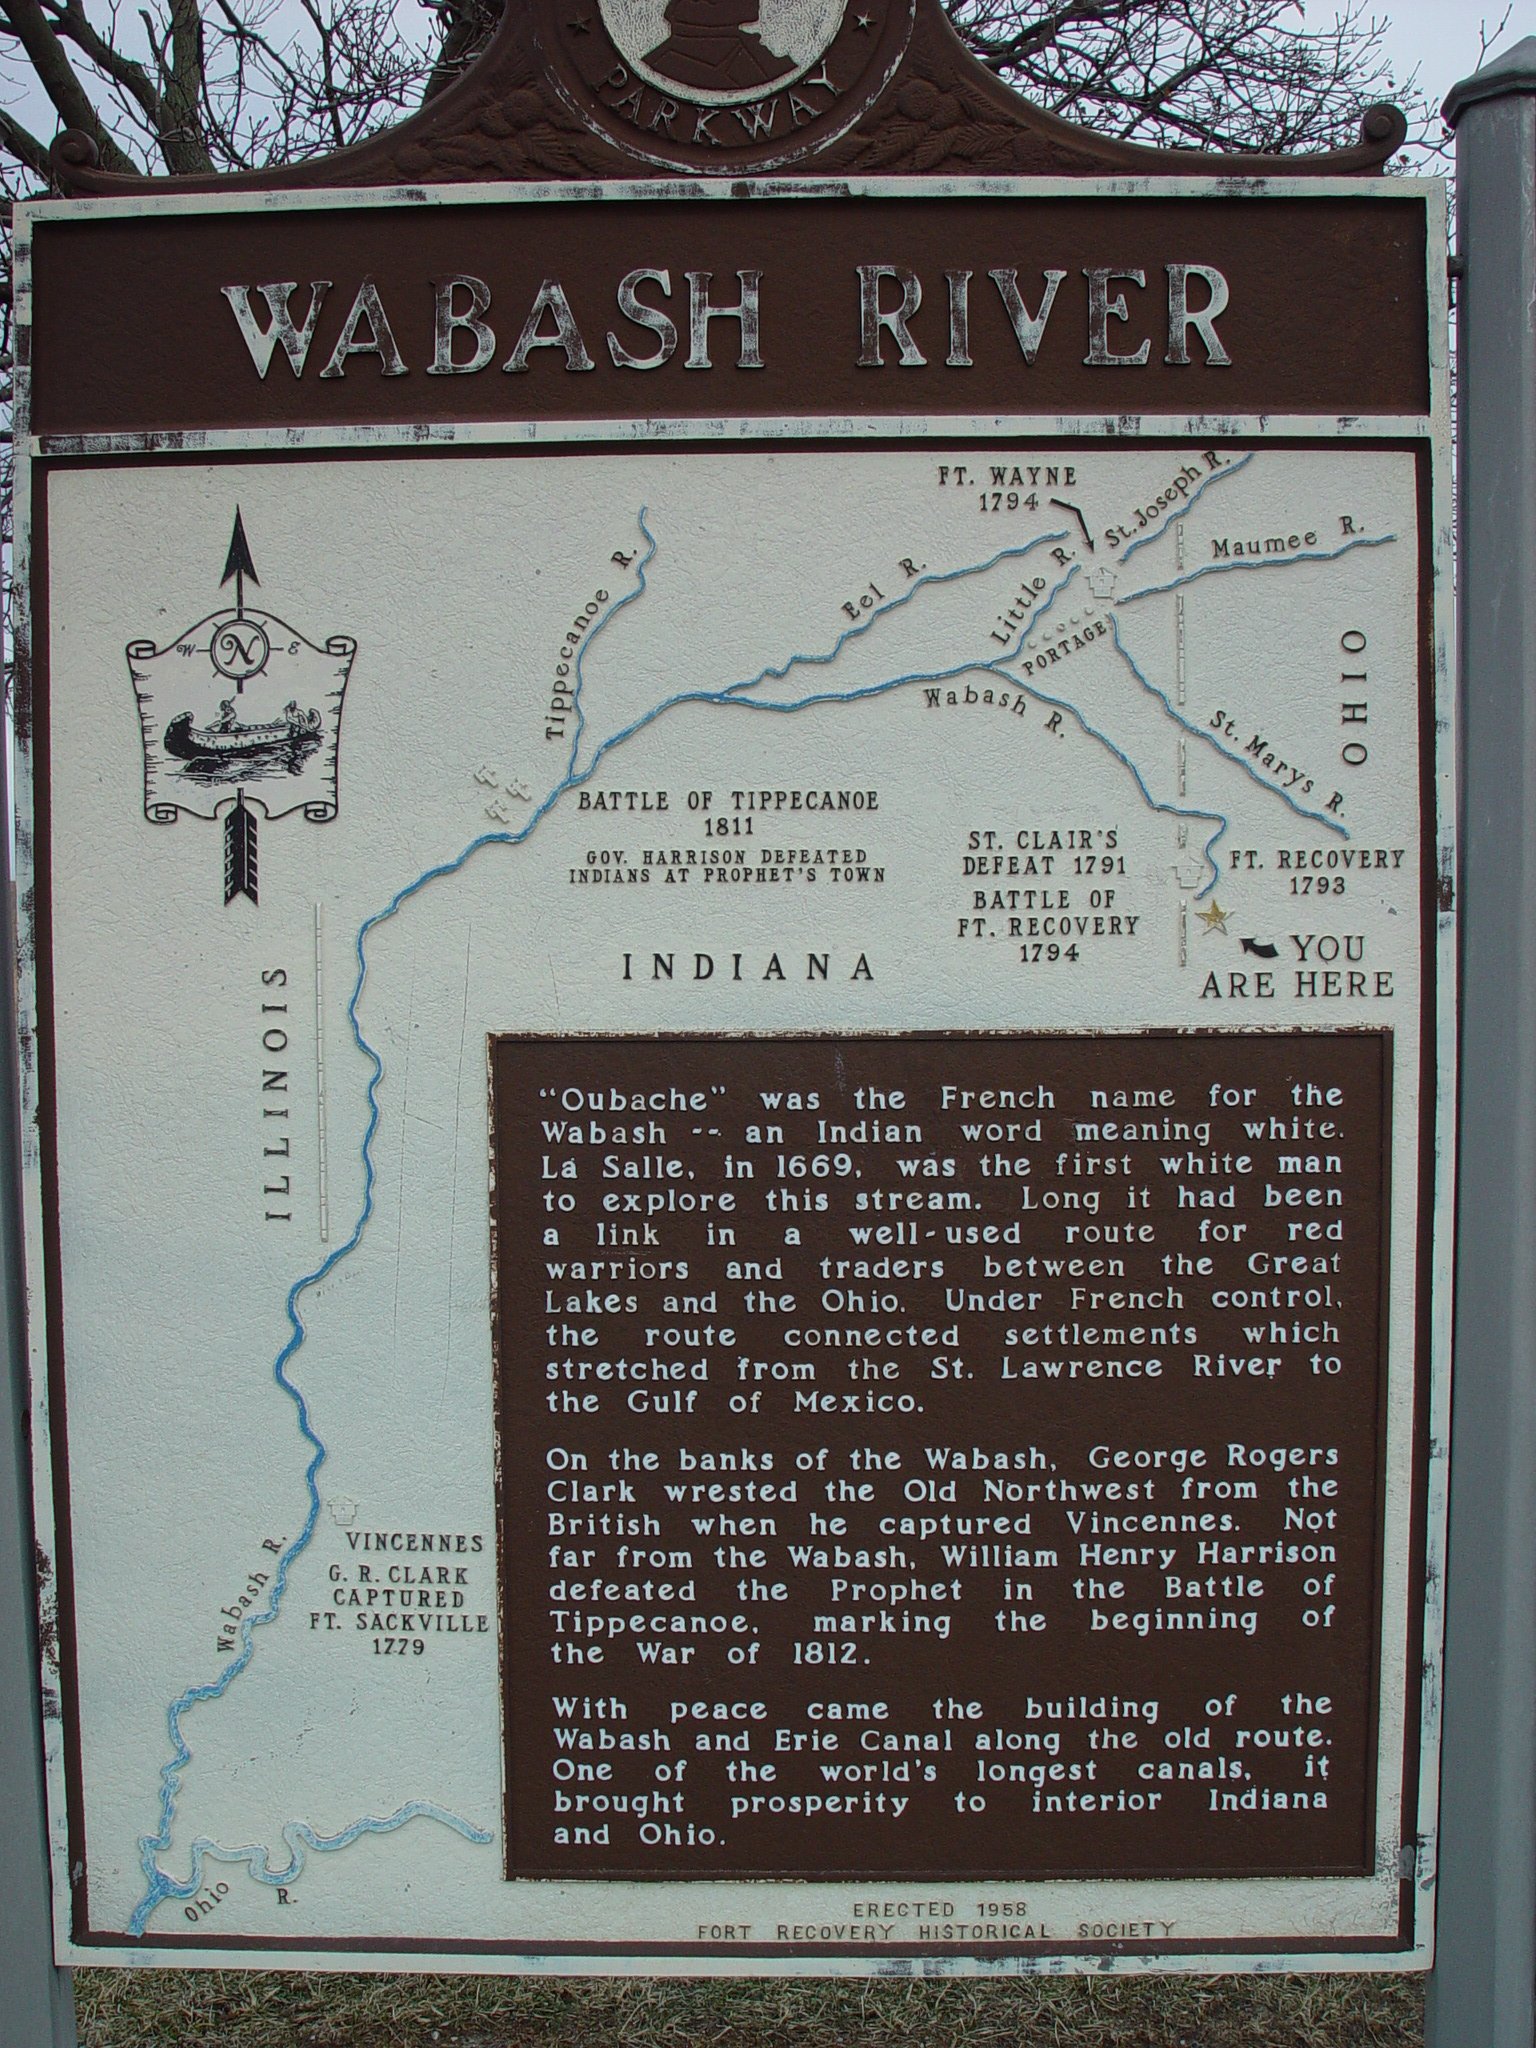 Section P - Head of the Wabash